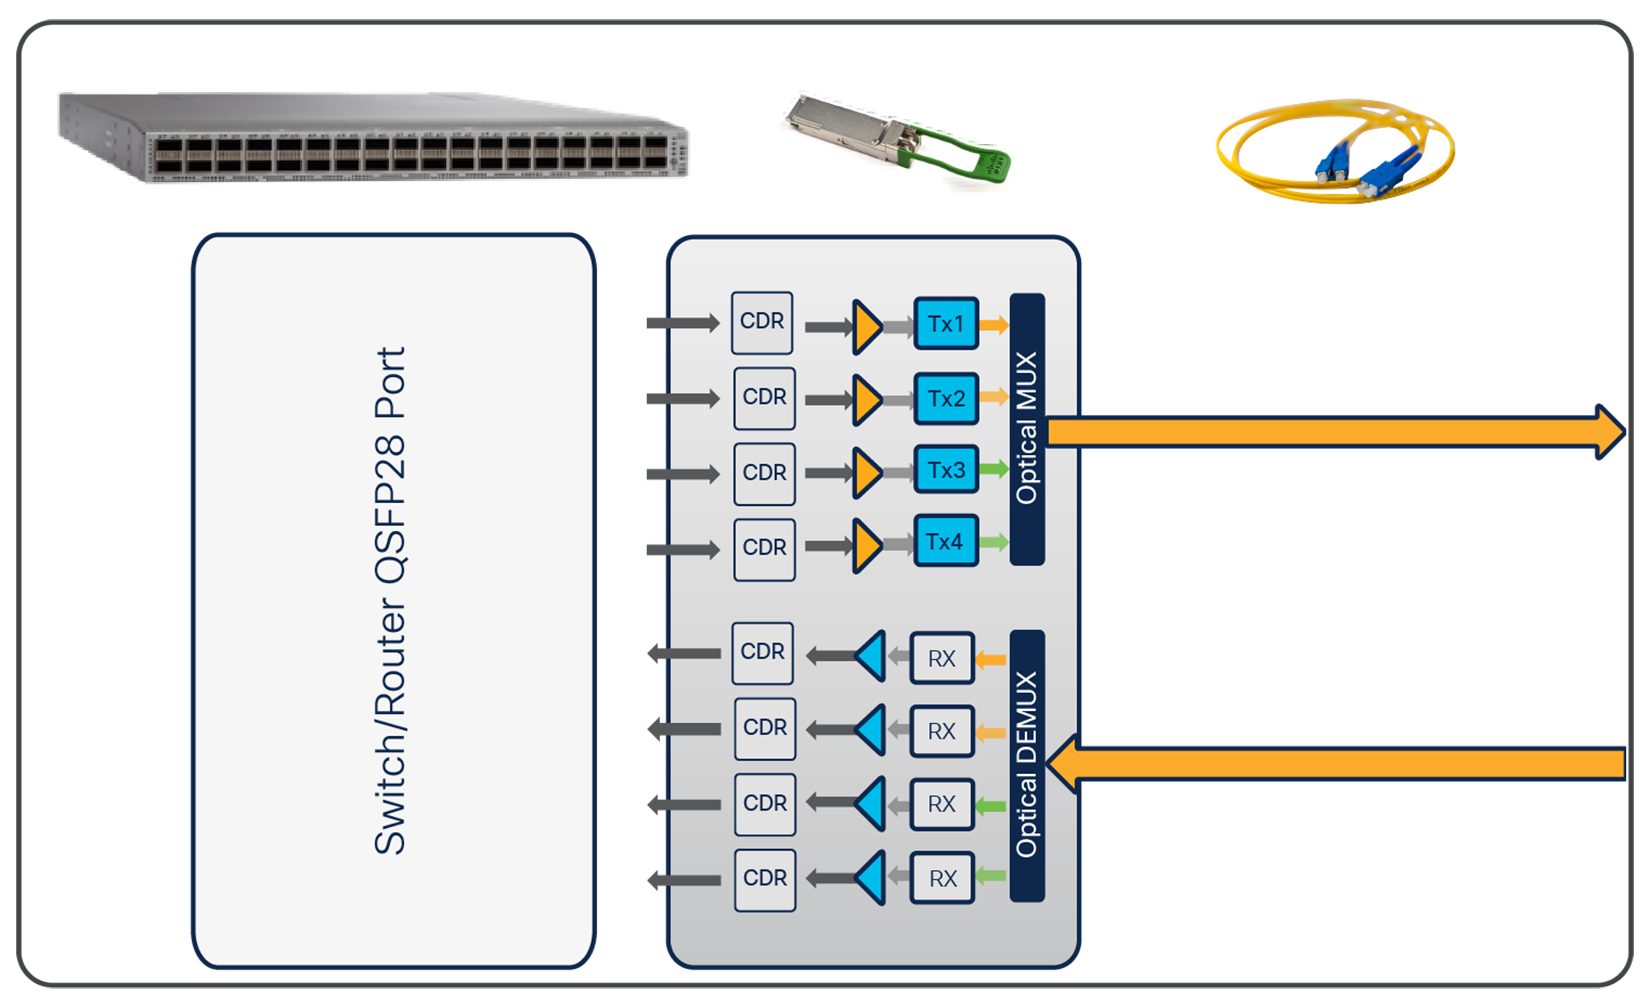 QSFP28 modules are inherently four-lane devices